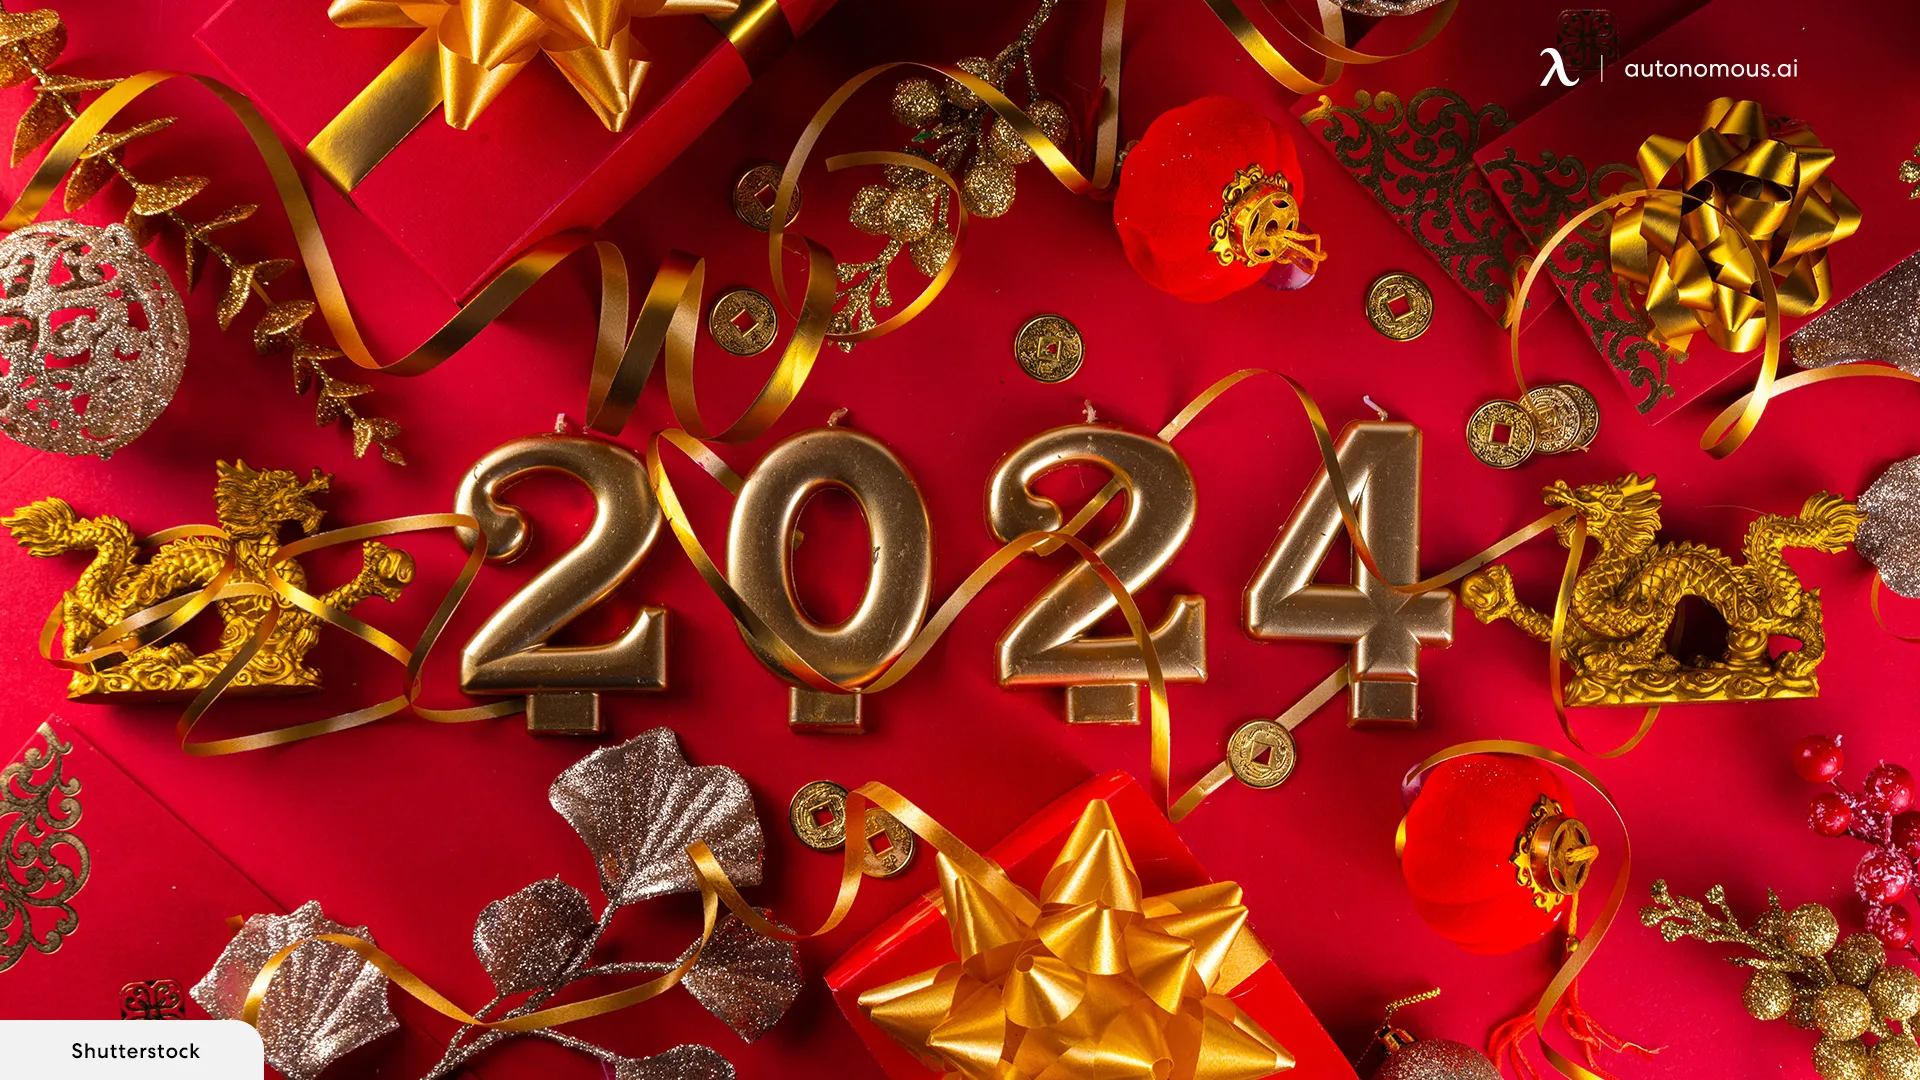 When Is the Lunar New Year 2024?